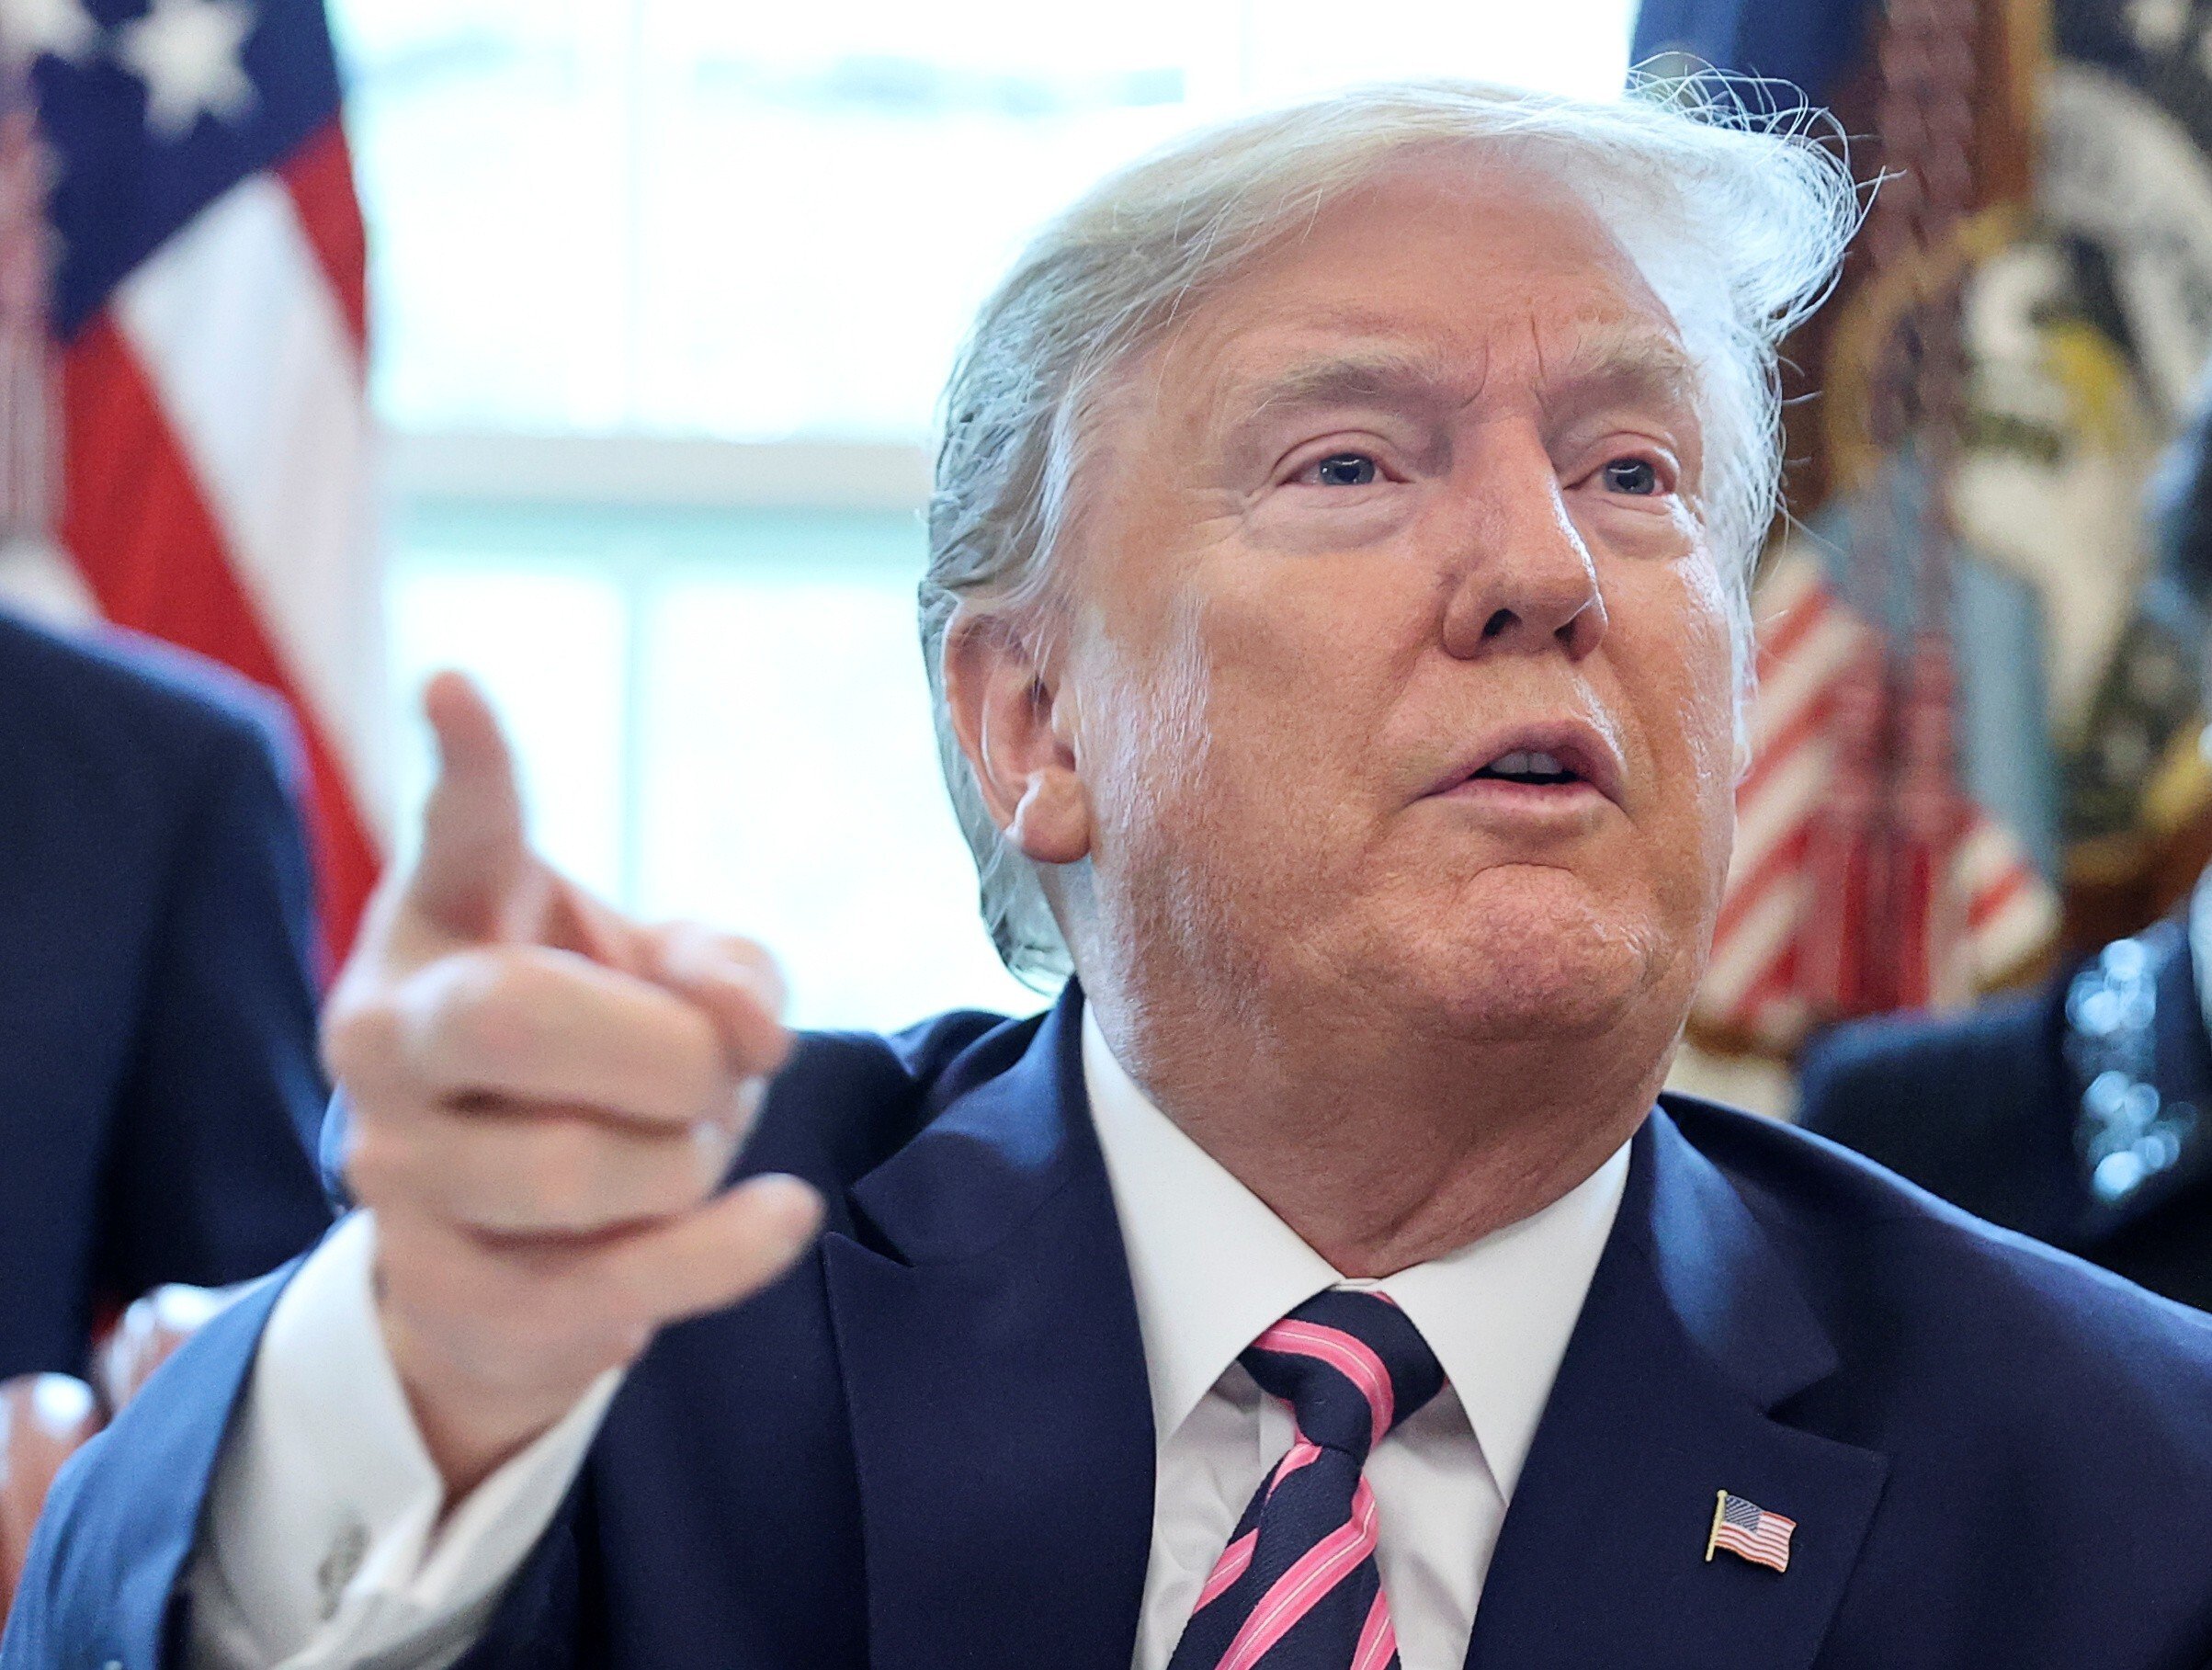 US President Donald Trump has accused China of hiding true infection and death numbers, but whatever they are, they would not help the US improve its international standing or its capacity to overcome the pandemic. Photo: Reuters